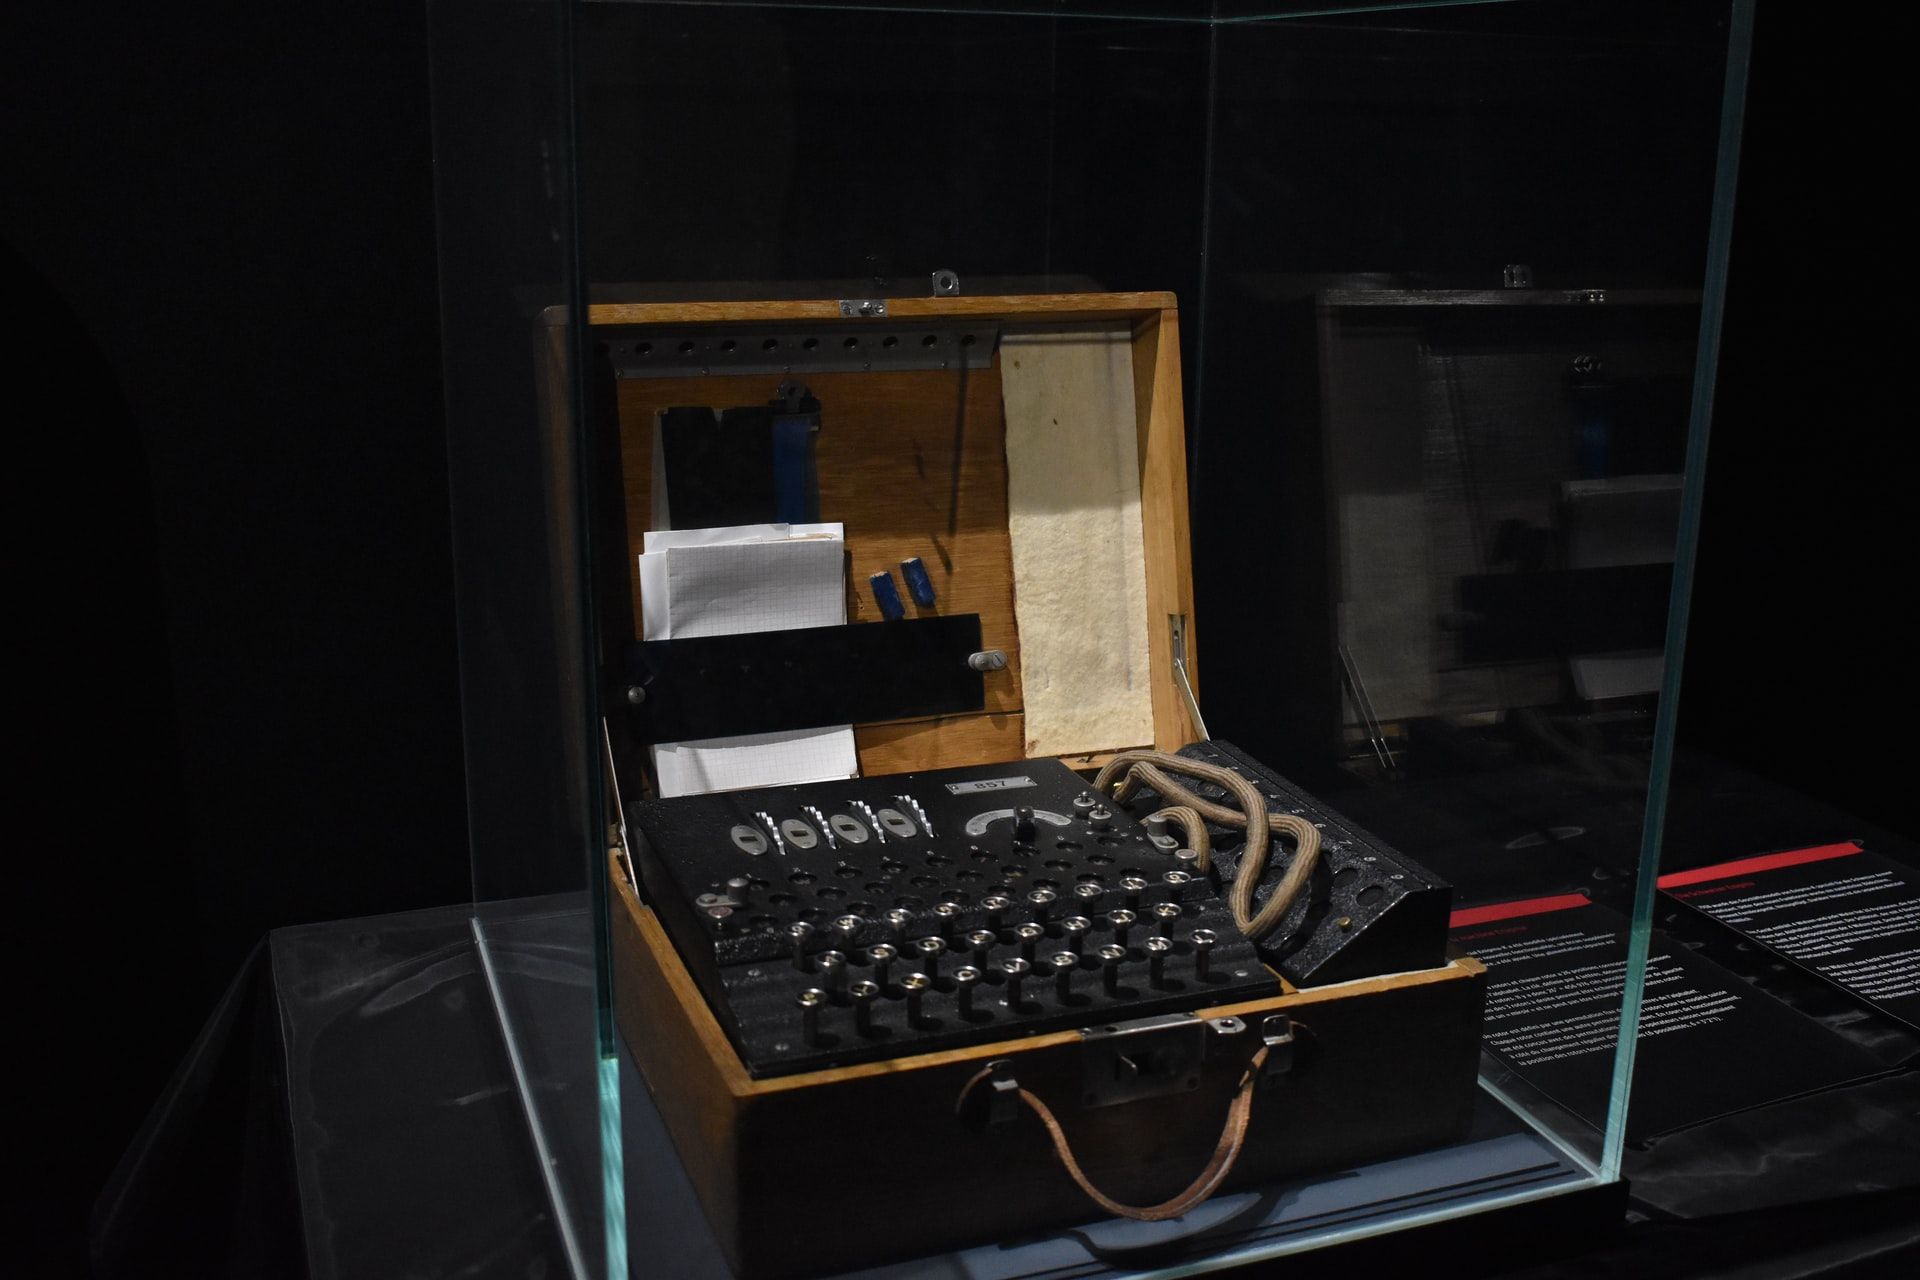 An old encryption machine much like the Enigma